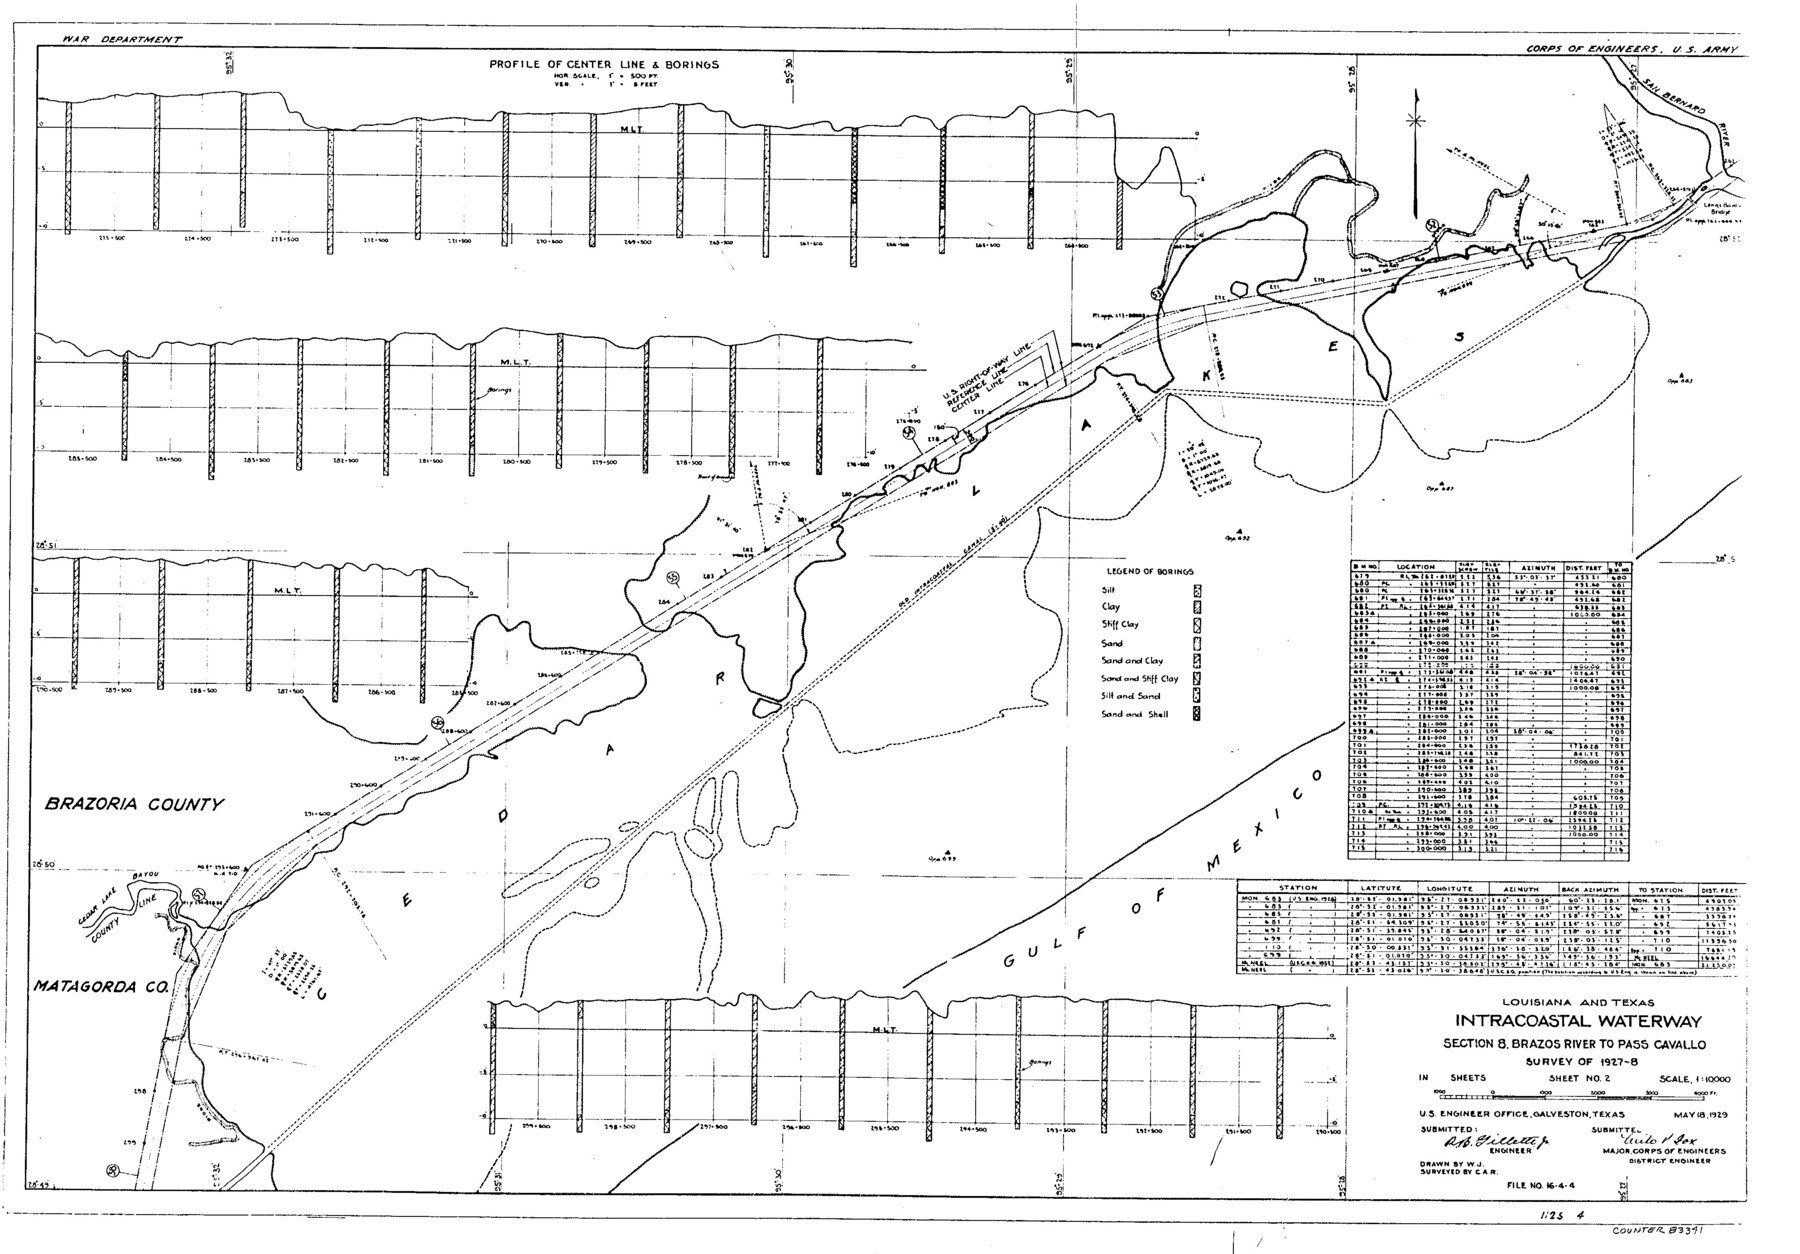 83341, Louisiana and Texas Intracoastal Waterway, General Map Collection